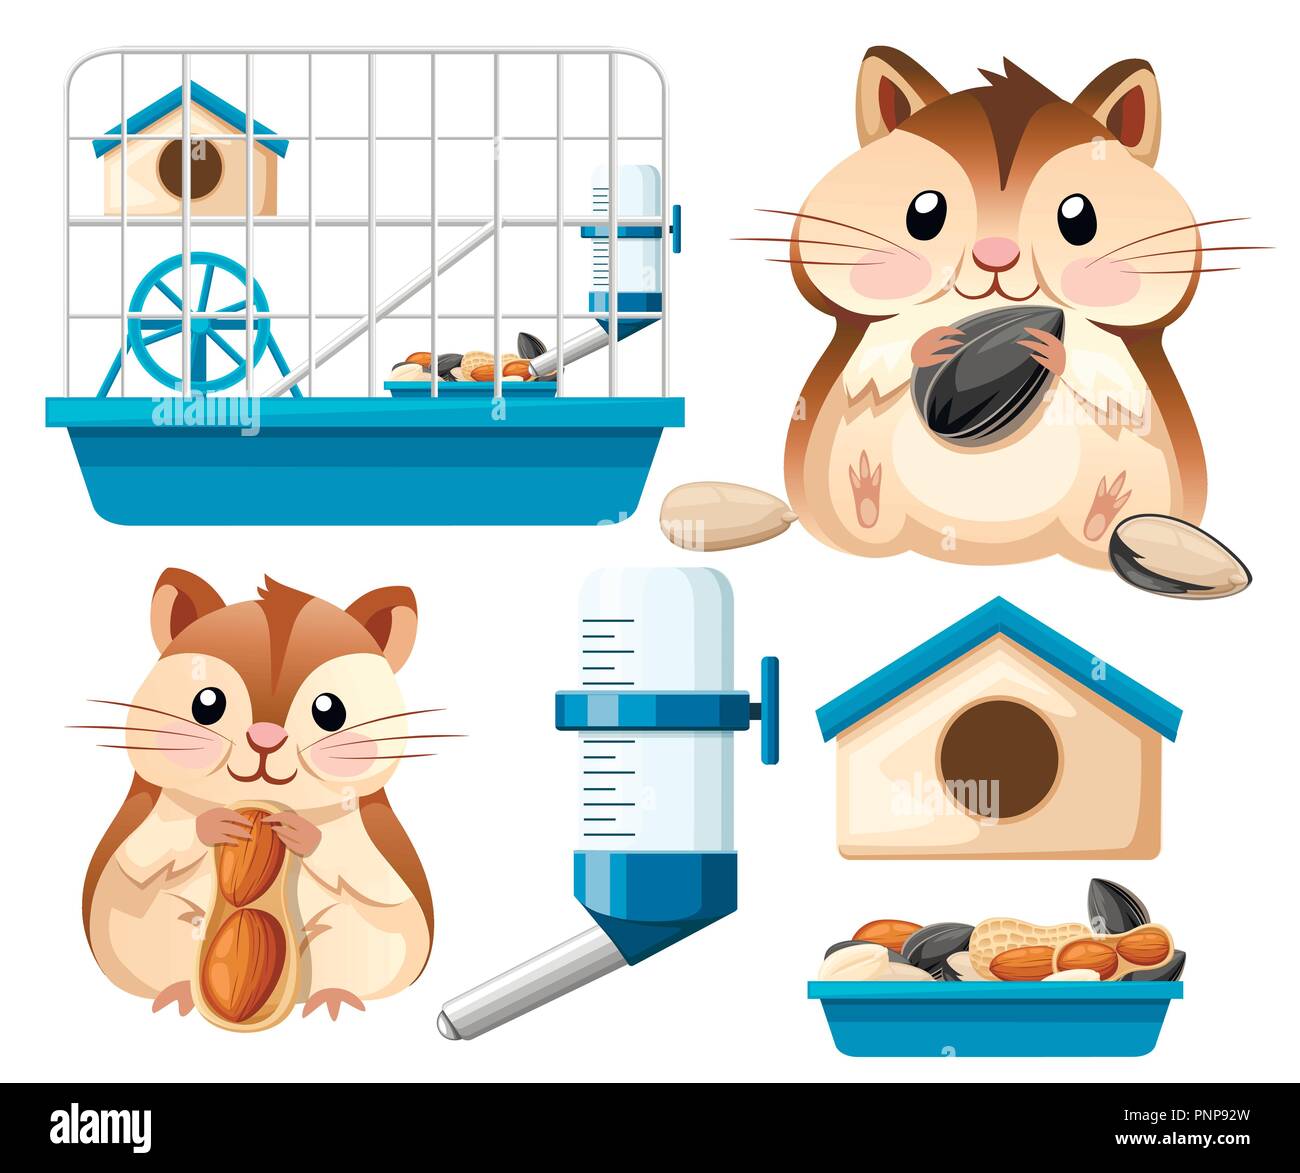 Hamster Icon Collection Cute Hamster Sit And Holding A Sunflower Seed And Nut Hamster Cage Wheel And Automatic Drinker Cartoon Character Design Stock Vector Image Art Alamy